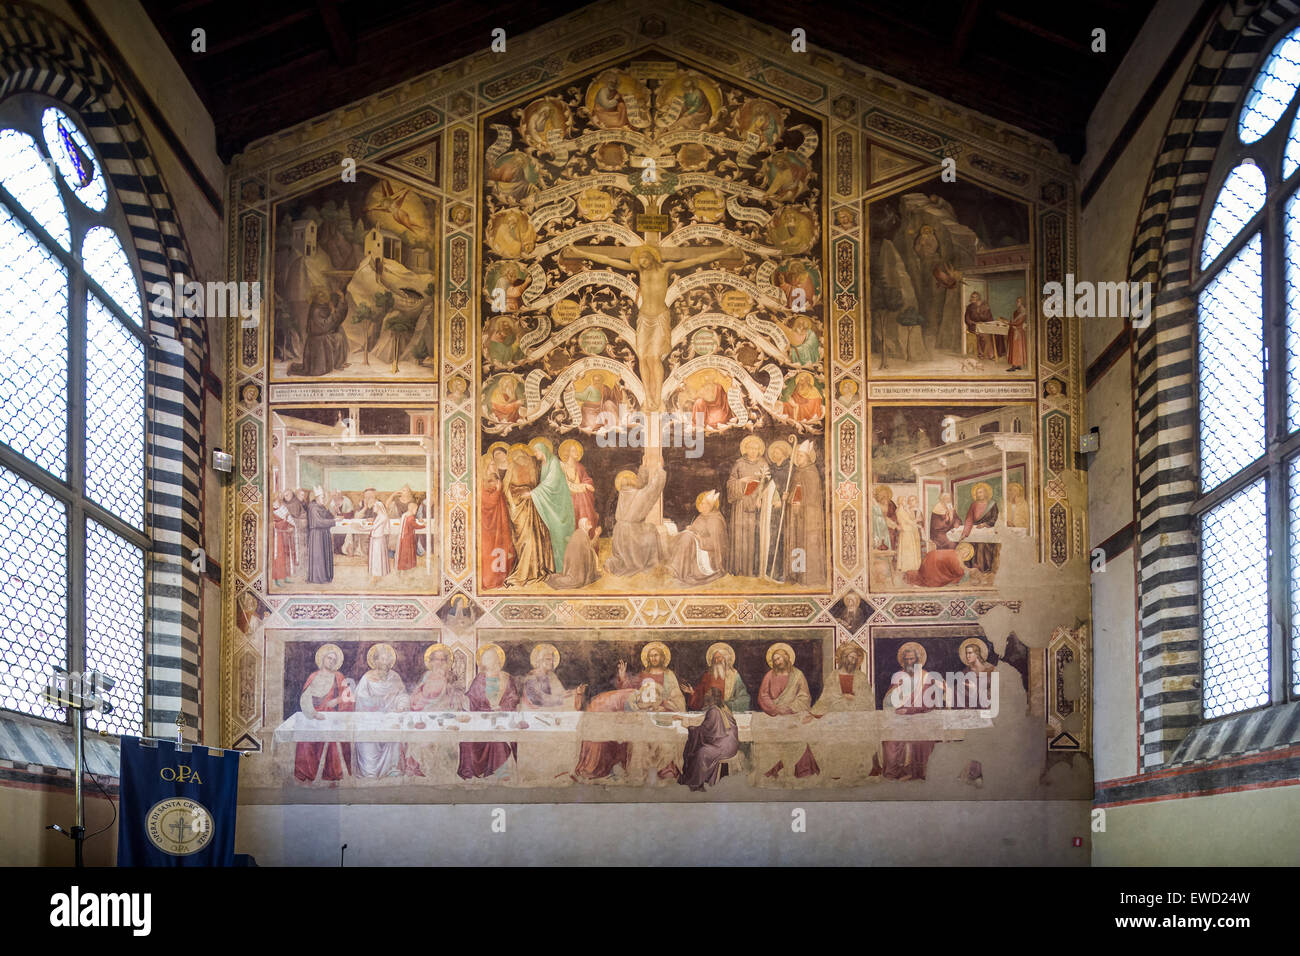 wall painting in old refectory, Basilica di Santa Croce, Basilica of the Holy Cross, Florence, Italy Stock Photo